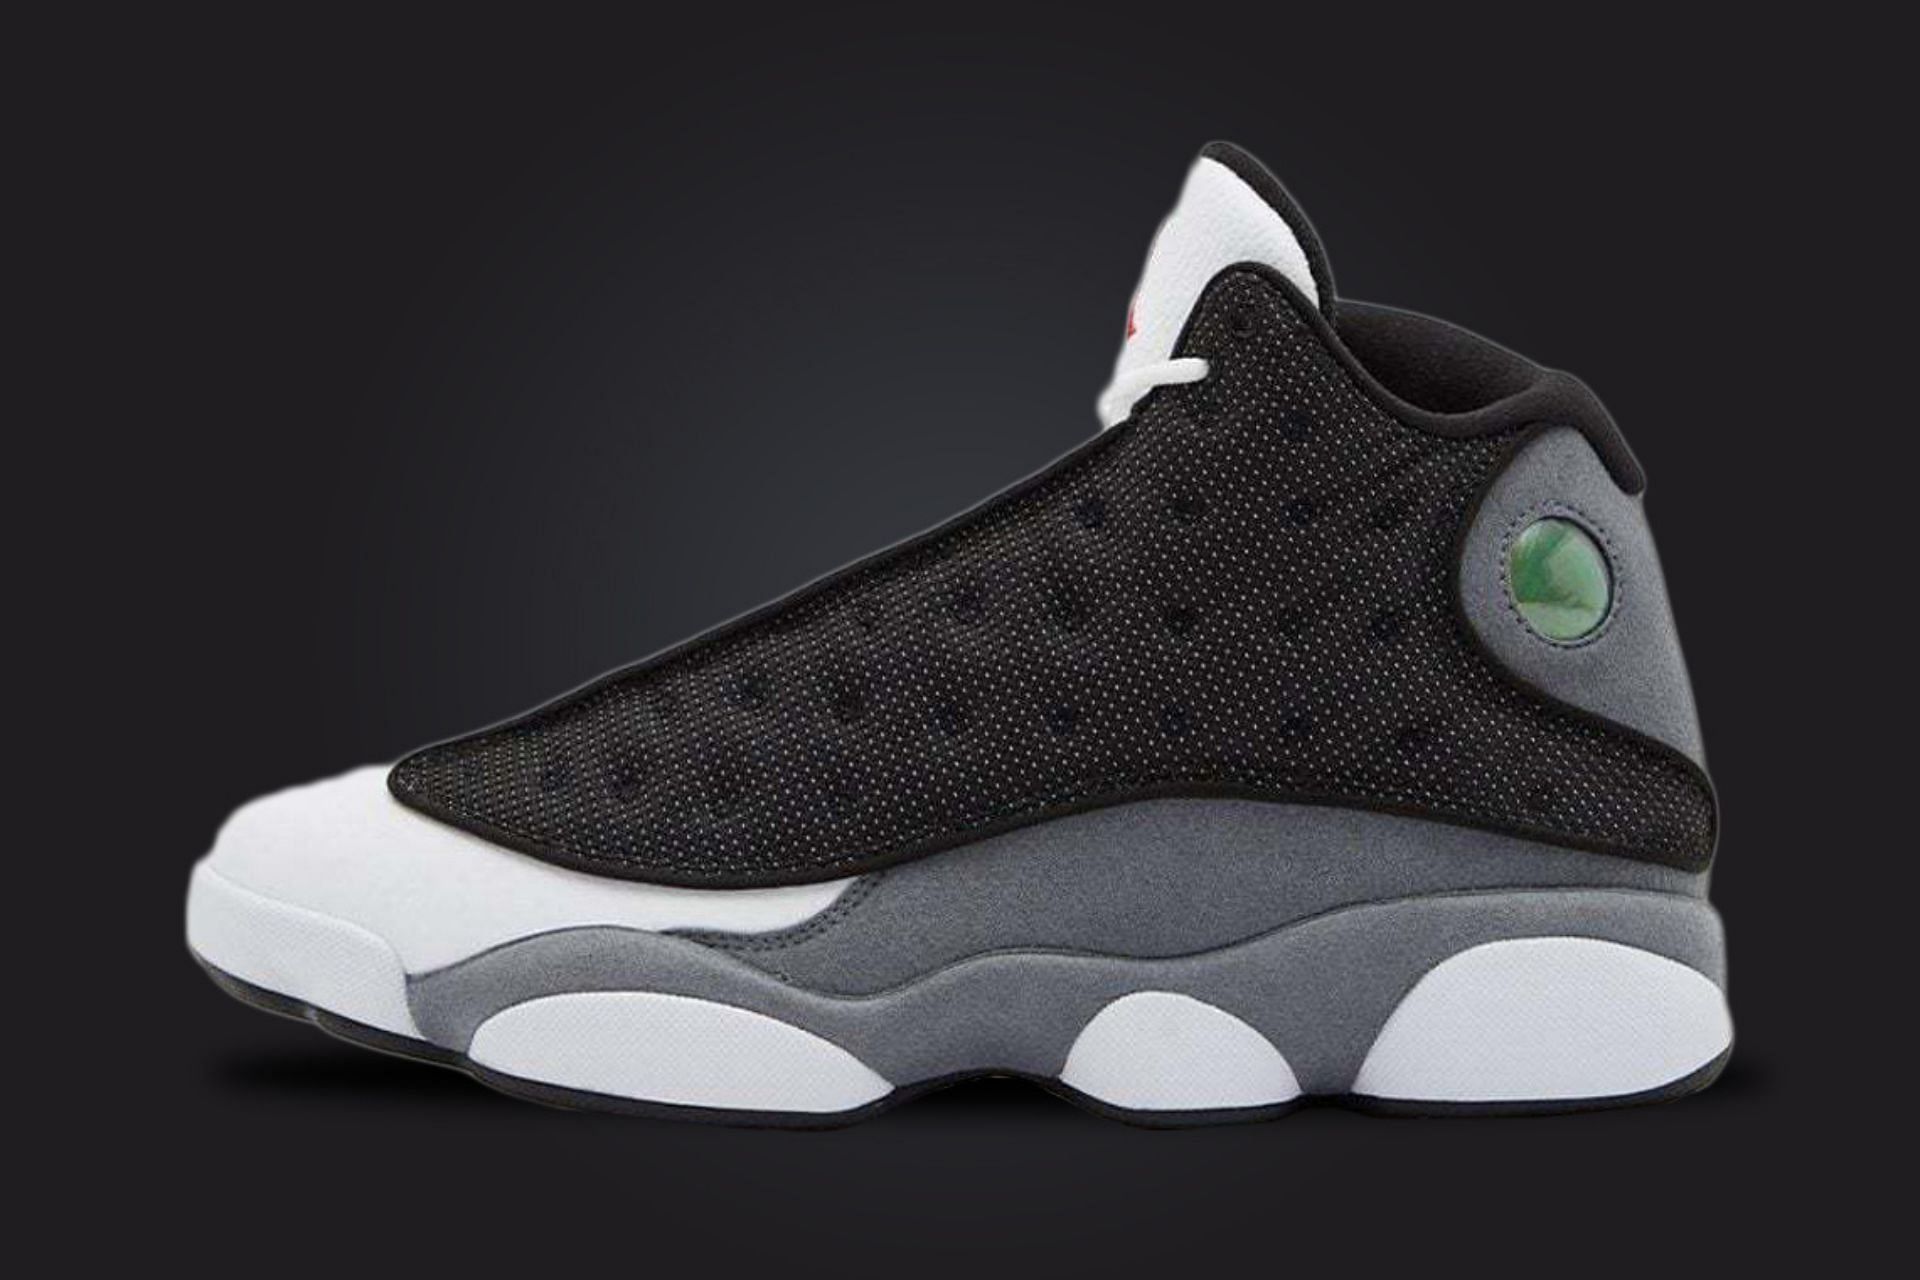 Take a closer look at the upcoming AJ 13 Black Flint colorway (Image via Offspring)